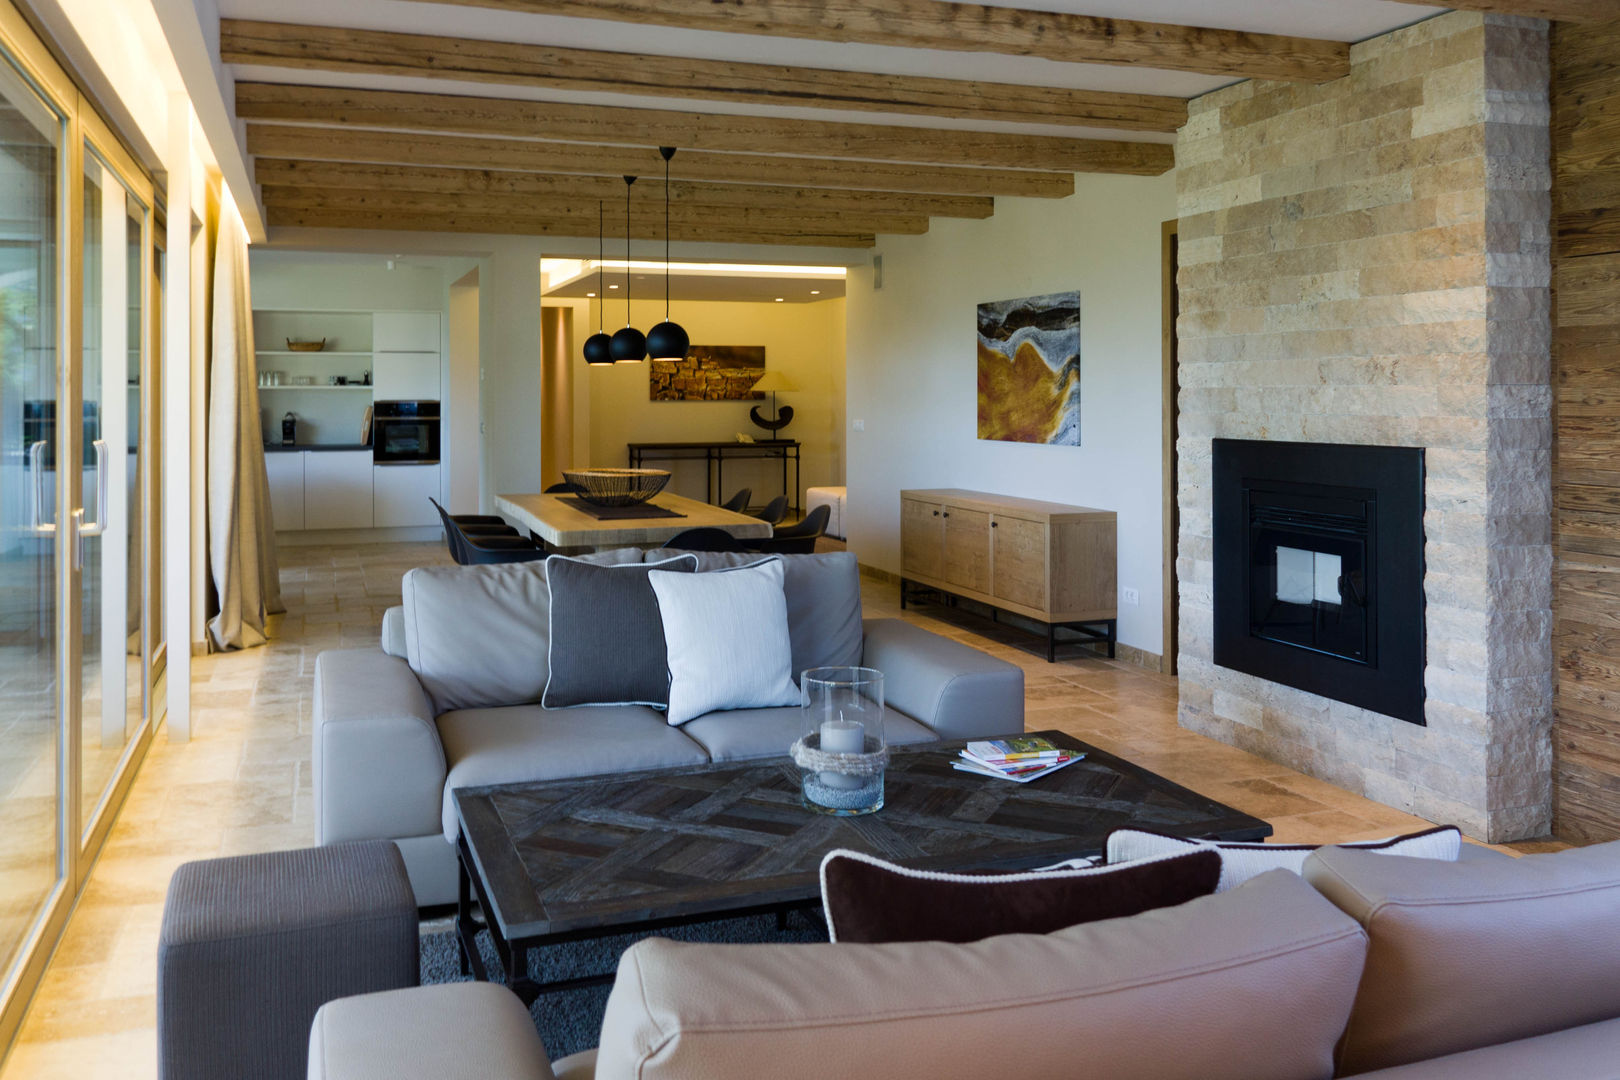 Living room with stone fireplace Pietre di Rapolano Country house Stone mosaic,travertine,fireplace,natural stone slab